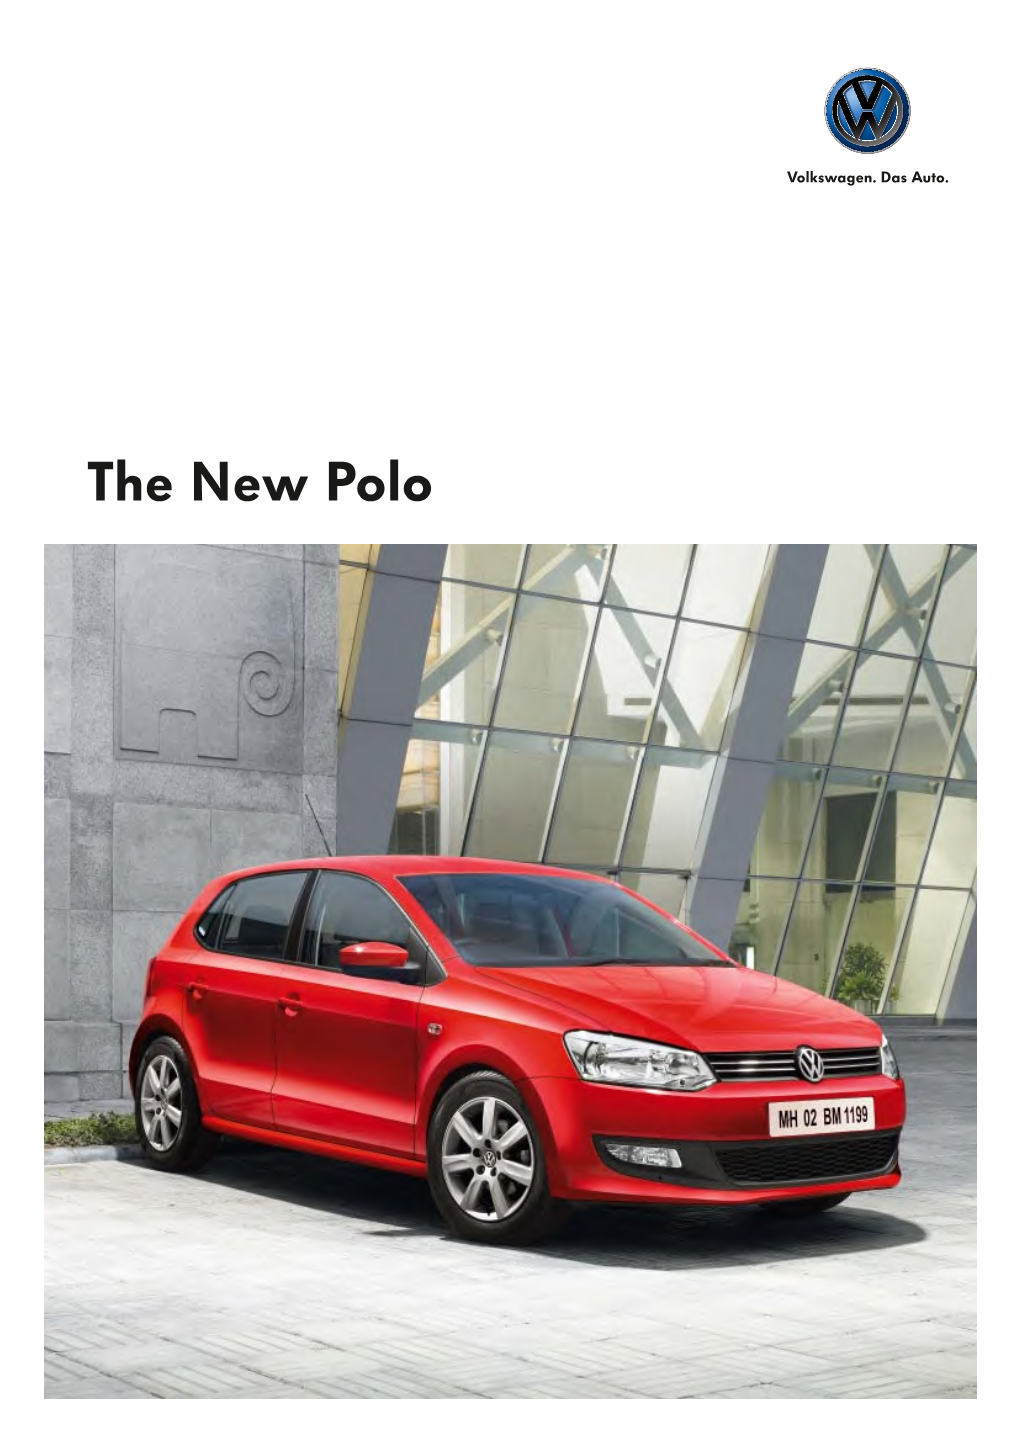 The New Polo Contents